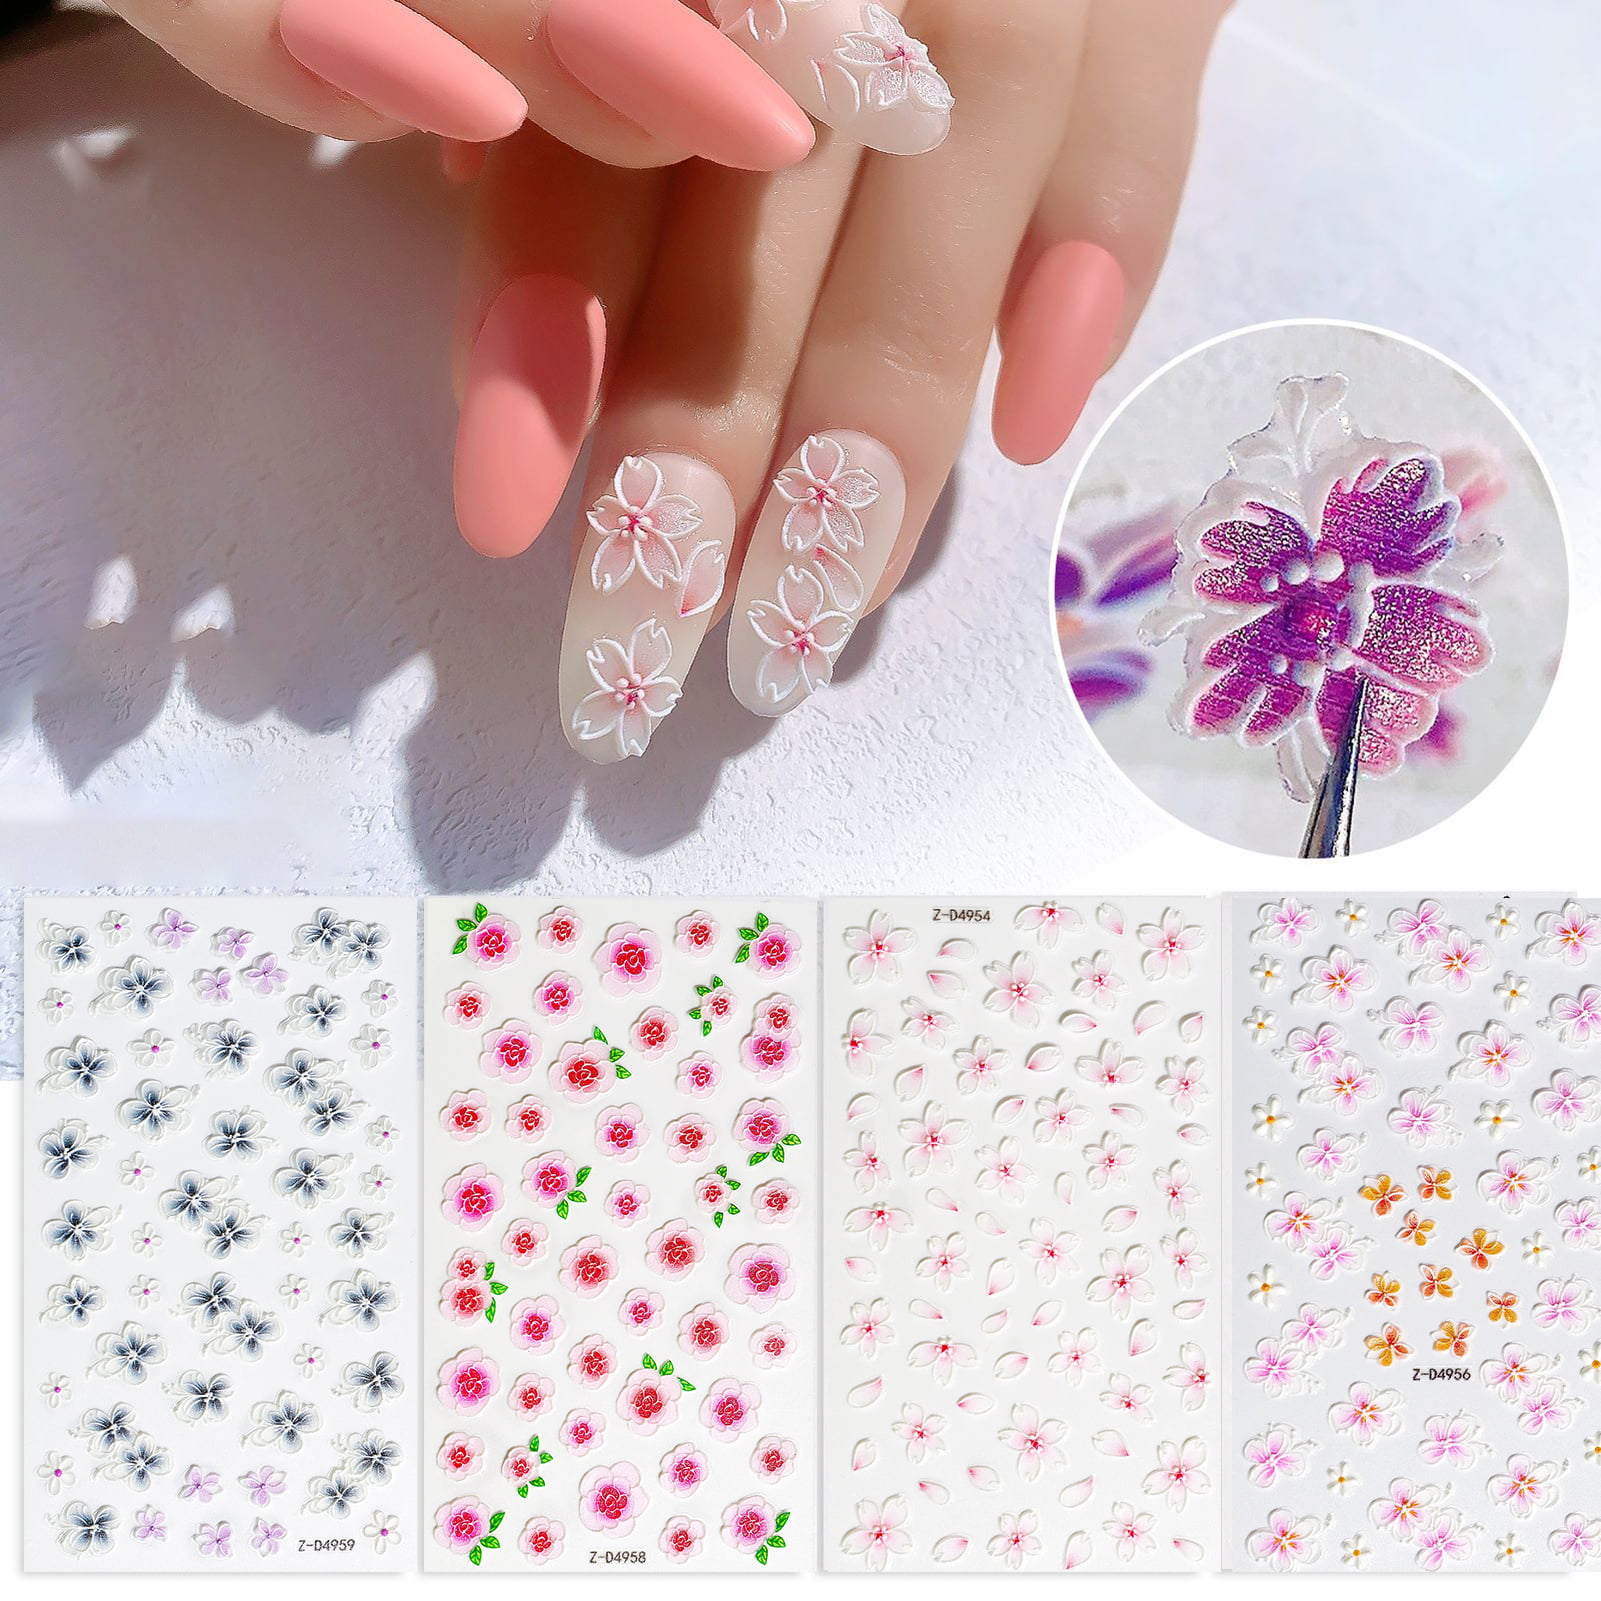 Mairbeon Women Ultra-thin Manicure Decor DIY Gold Silver Foil Nail Art  Stickers for Party